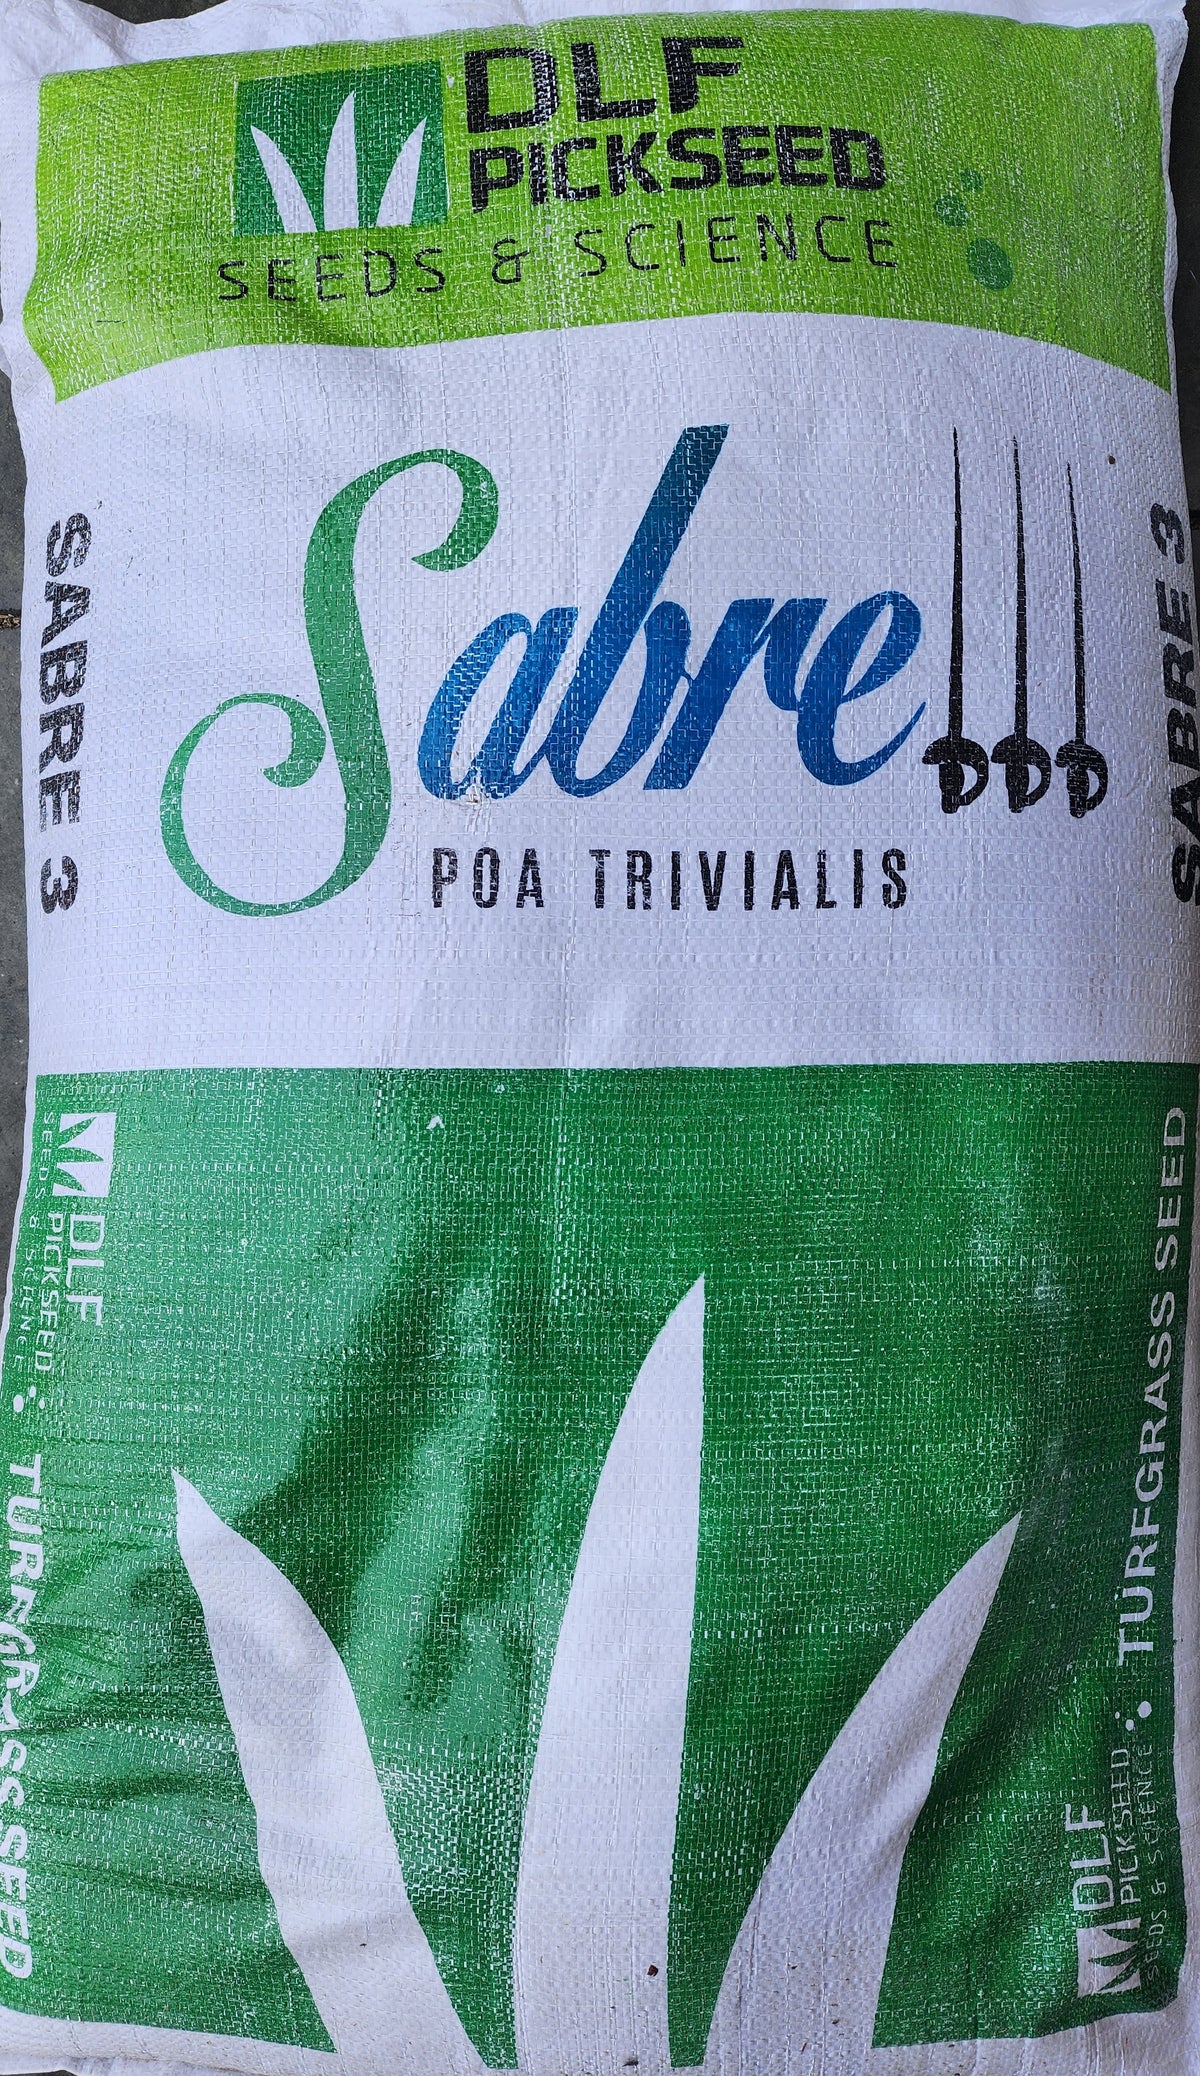 Sabre POA Trivialis Certified Treated Seeds